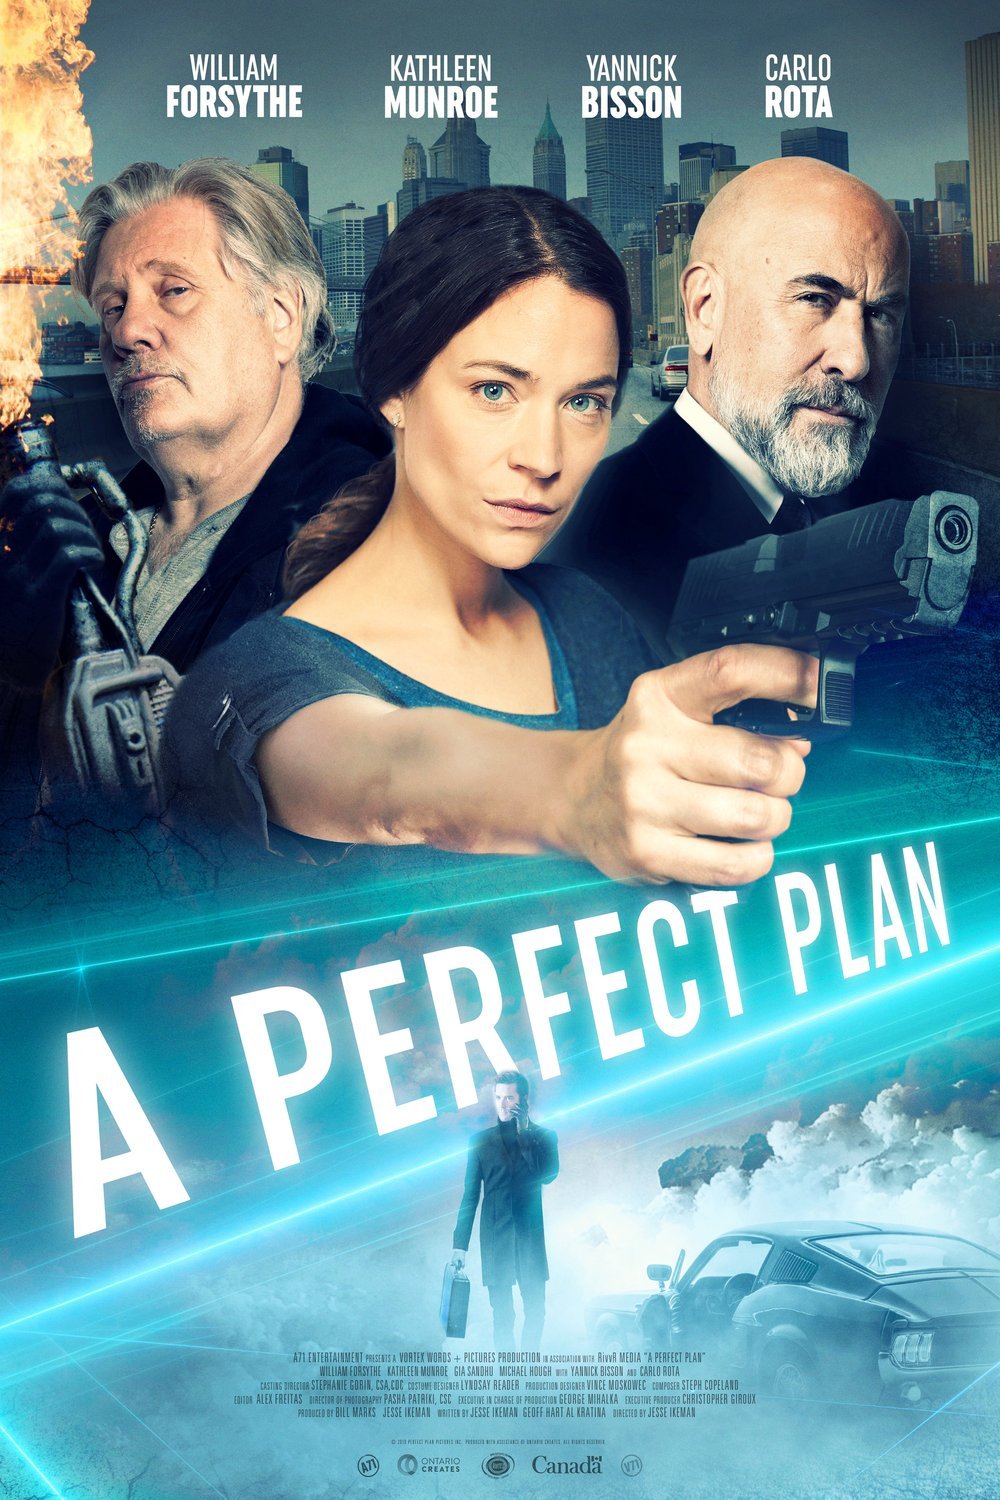 Poster of the movie A Perfect Plan